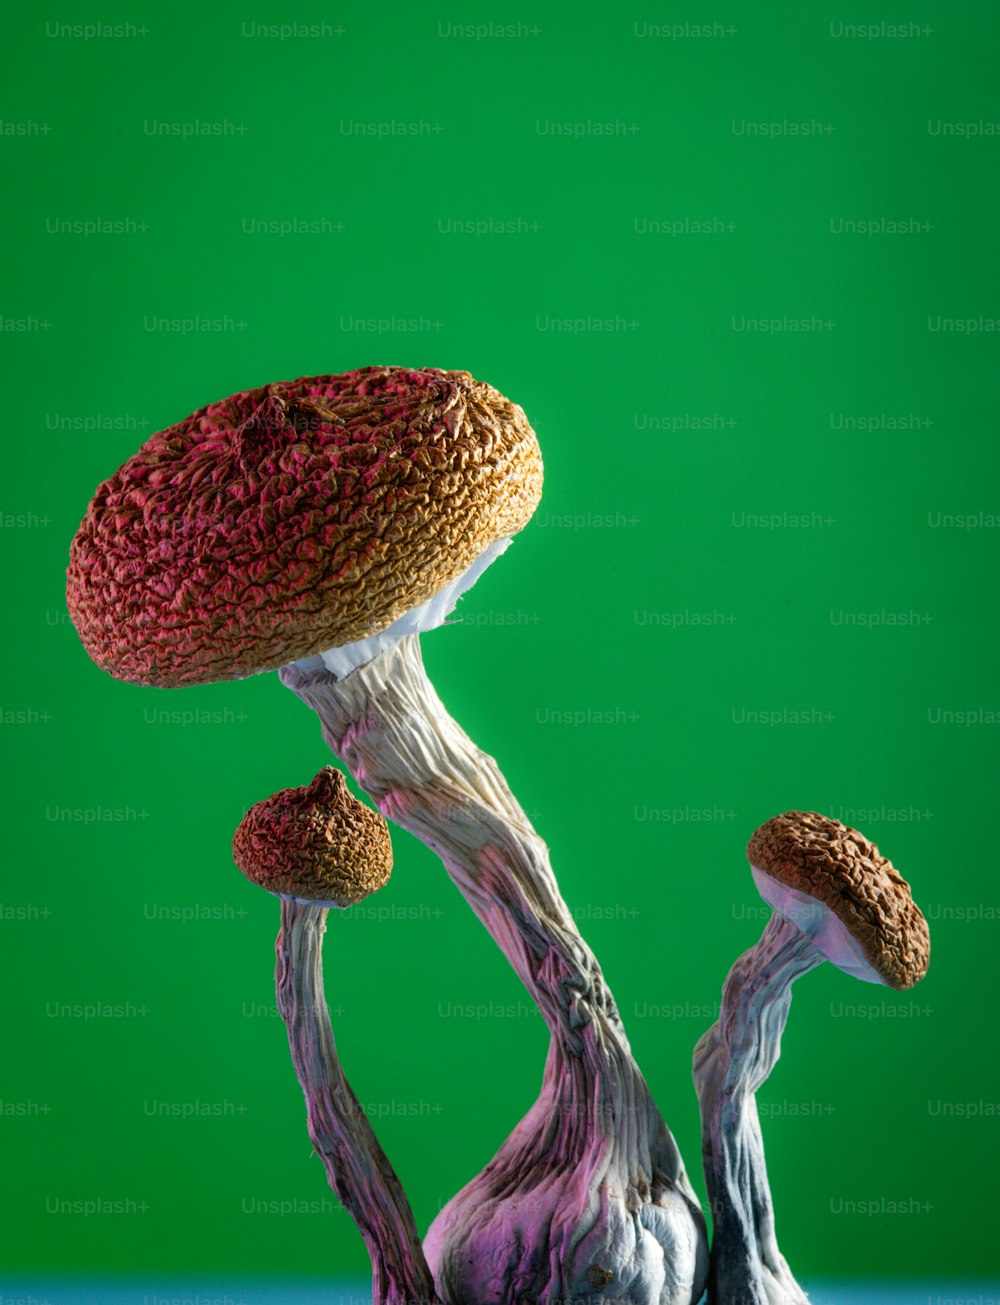 a close up of a mushroom on a green background